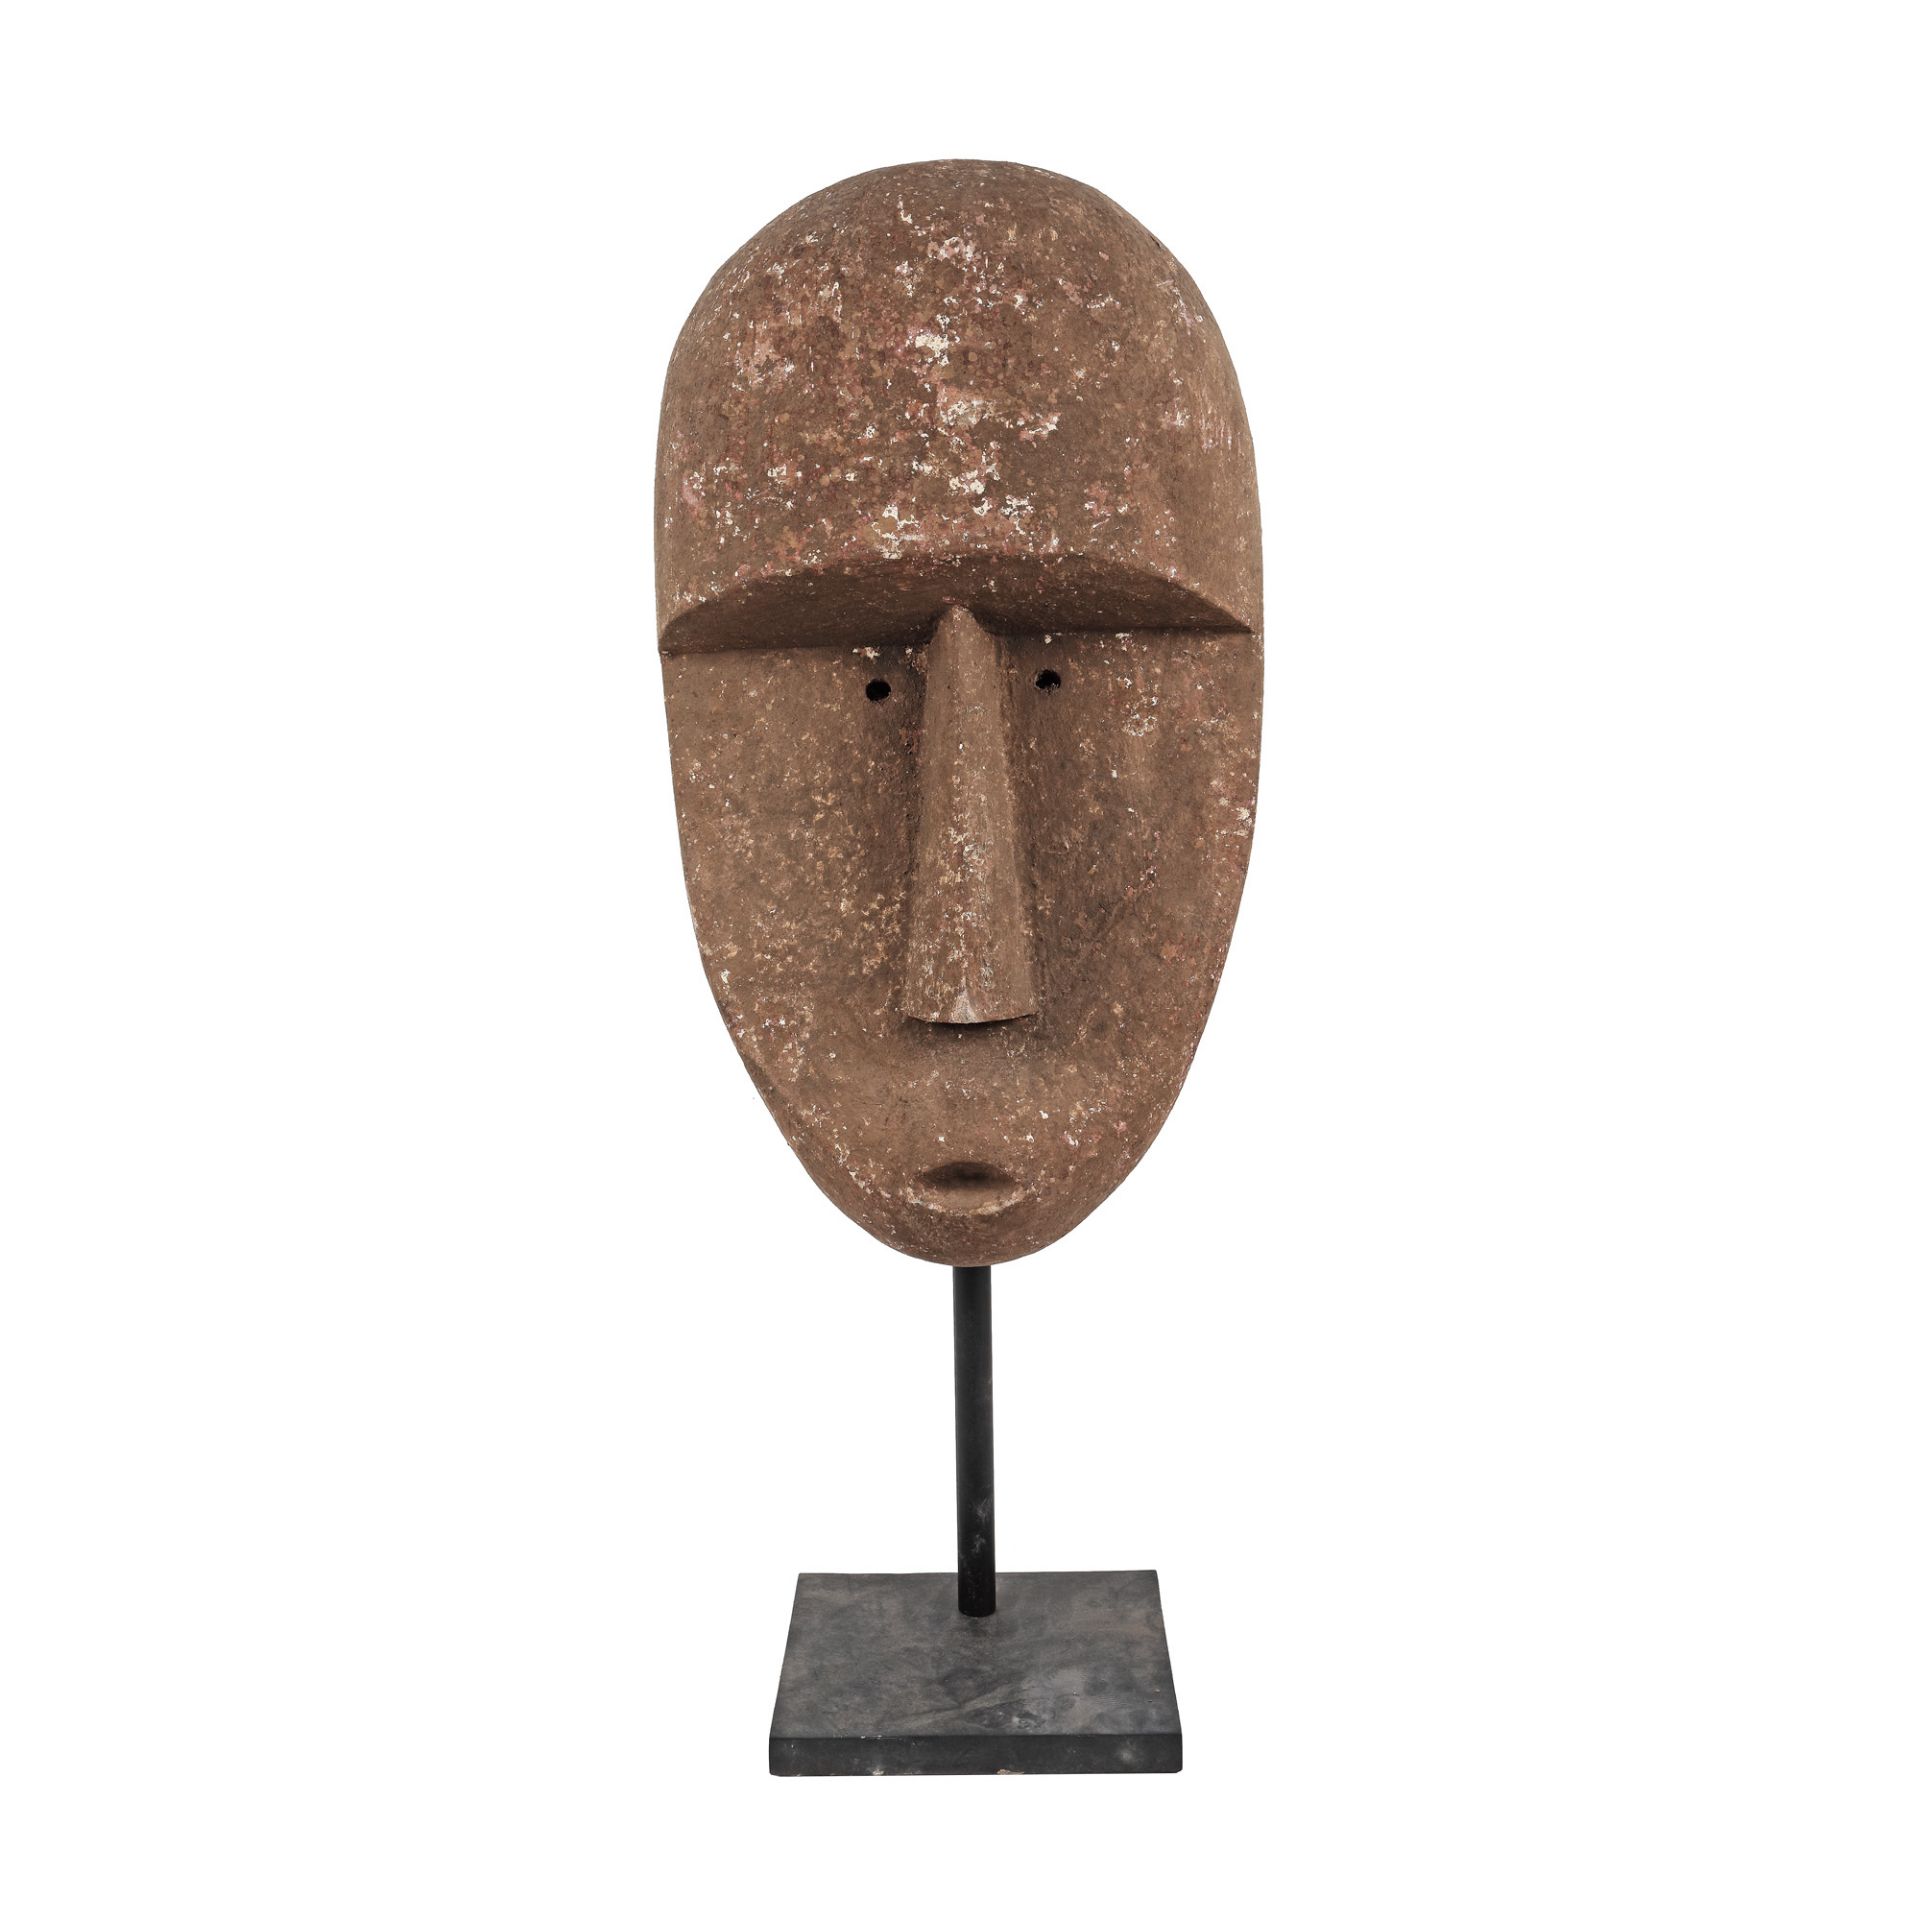 Stone mask, representing an idol, Indonesia, possibly the beginning of the 20th century